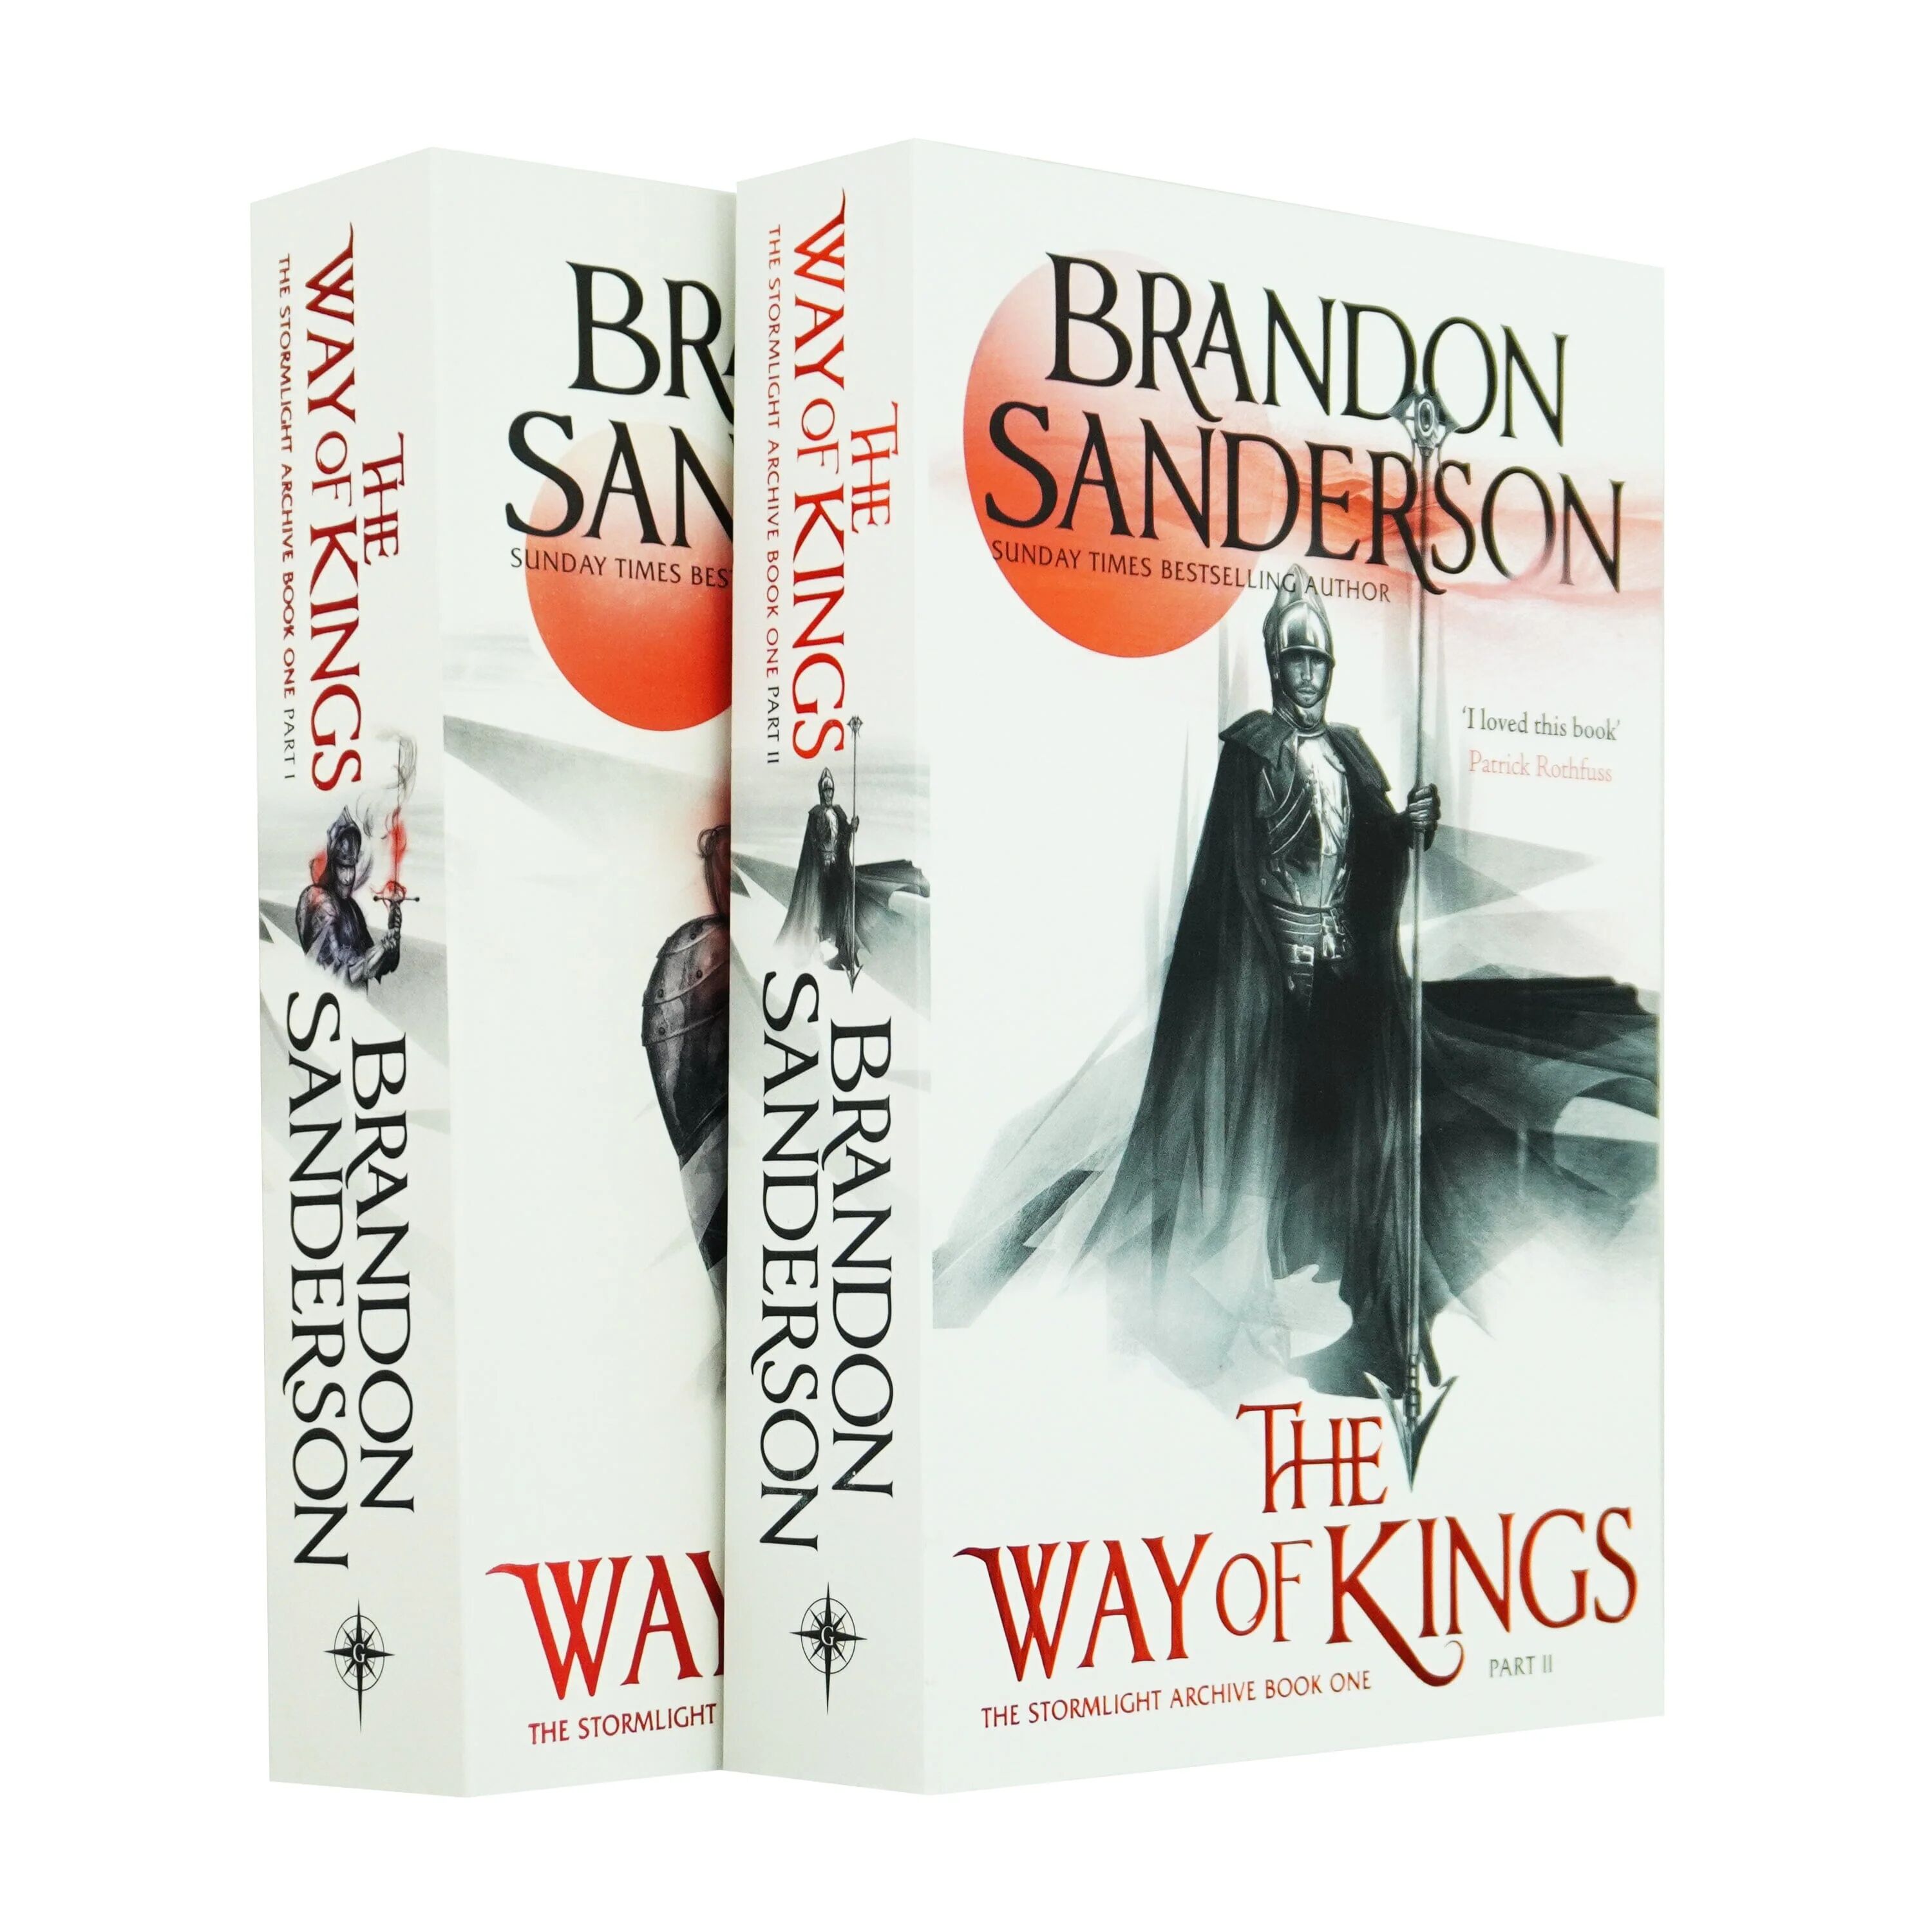 The Stormlight Archive Book One (Part 1 & 2) by Brandon Sanderson 2 Books Collection Set - Fiction - Paperback Gollancz